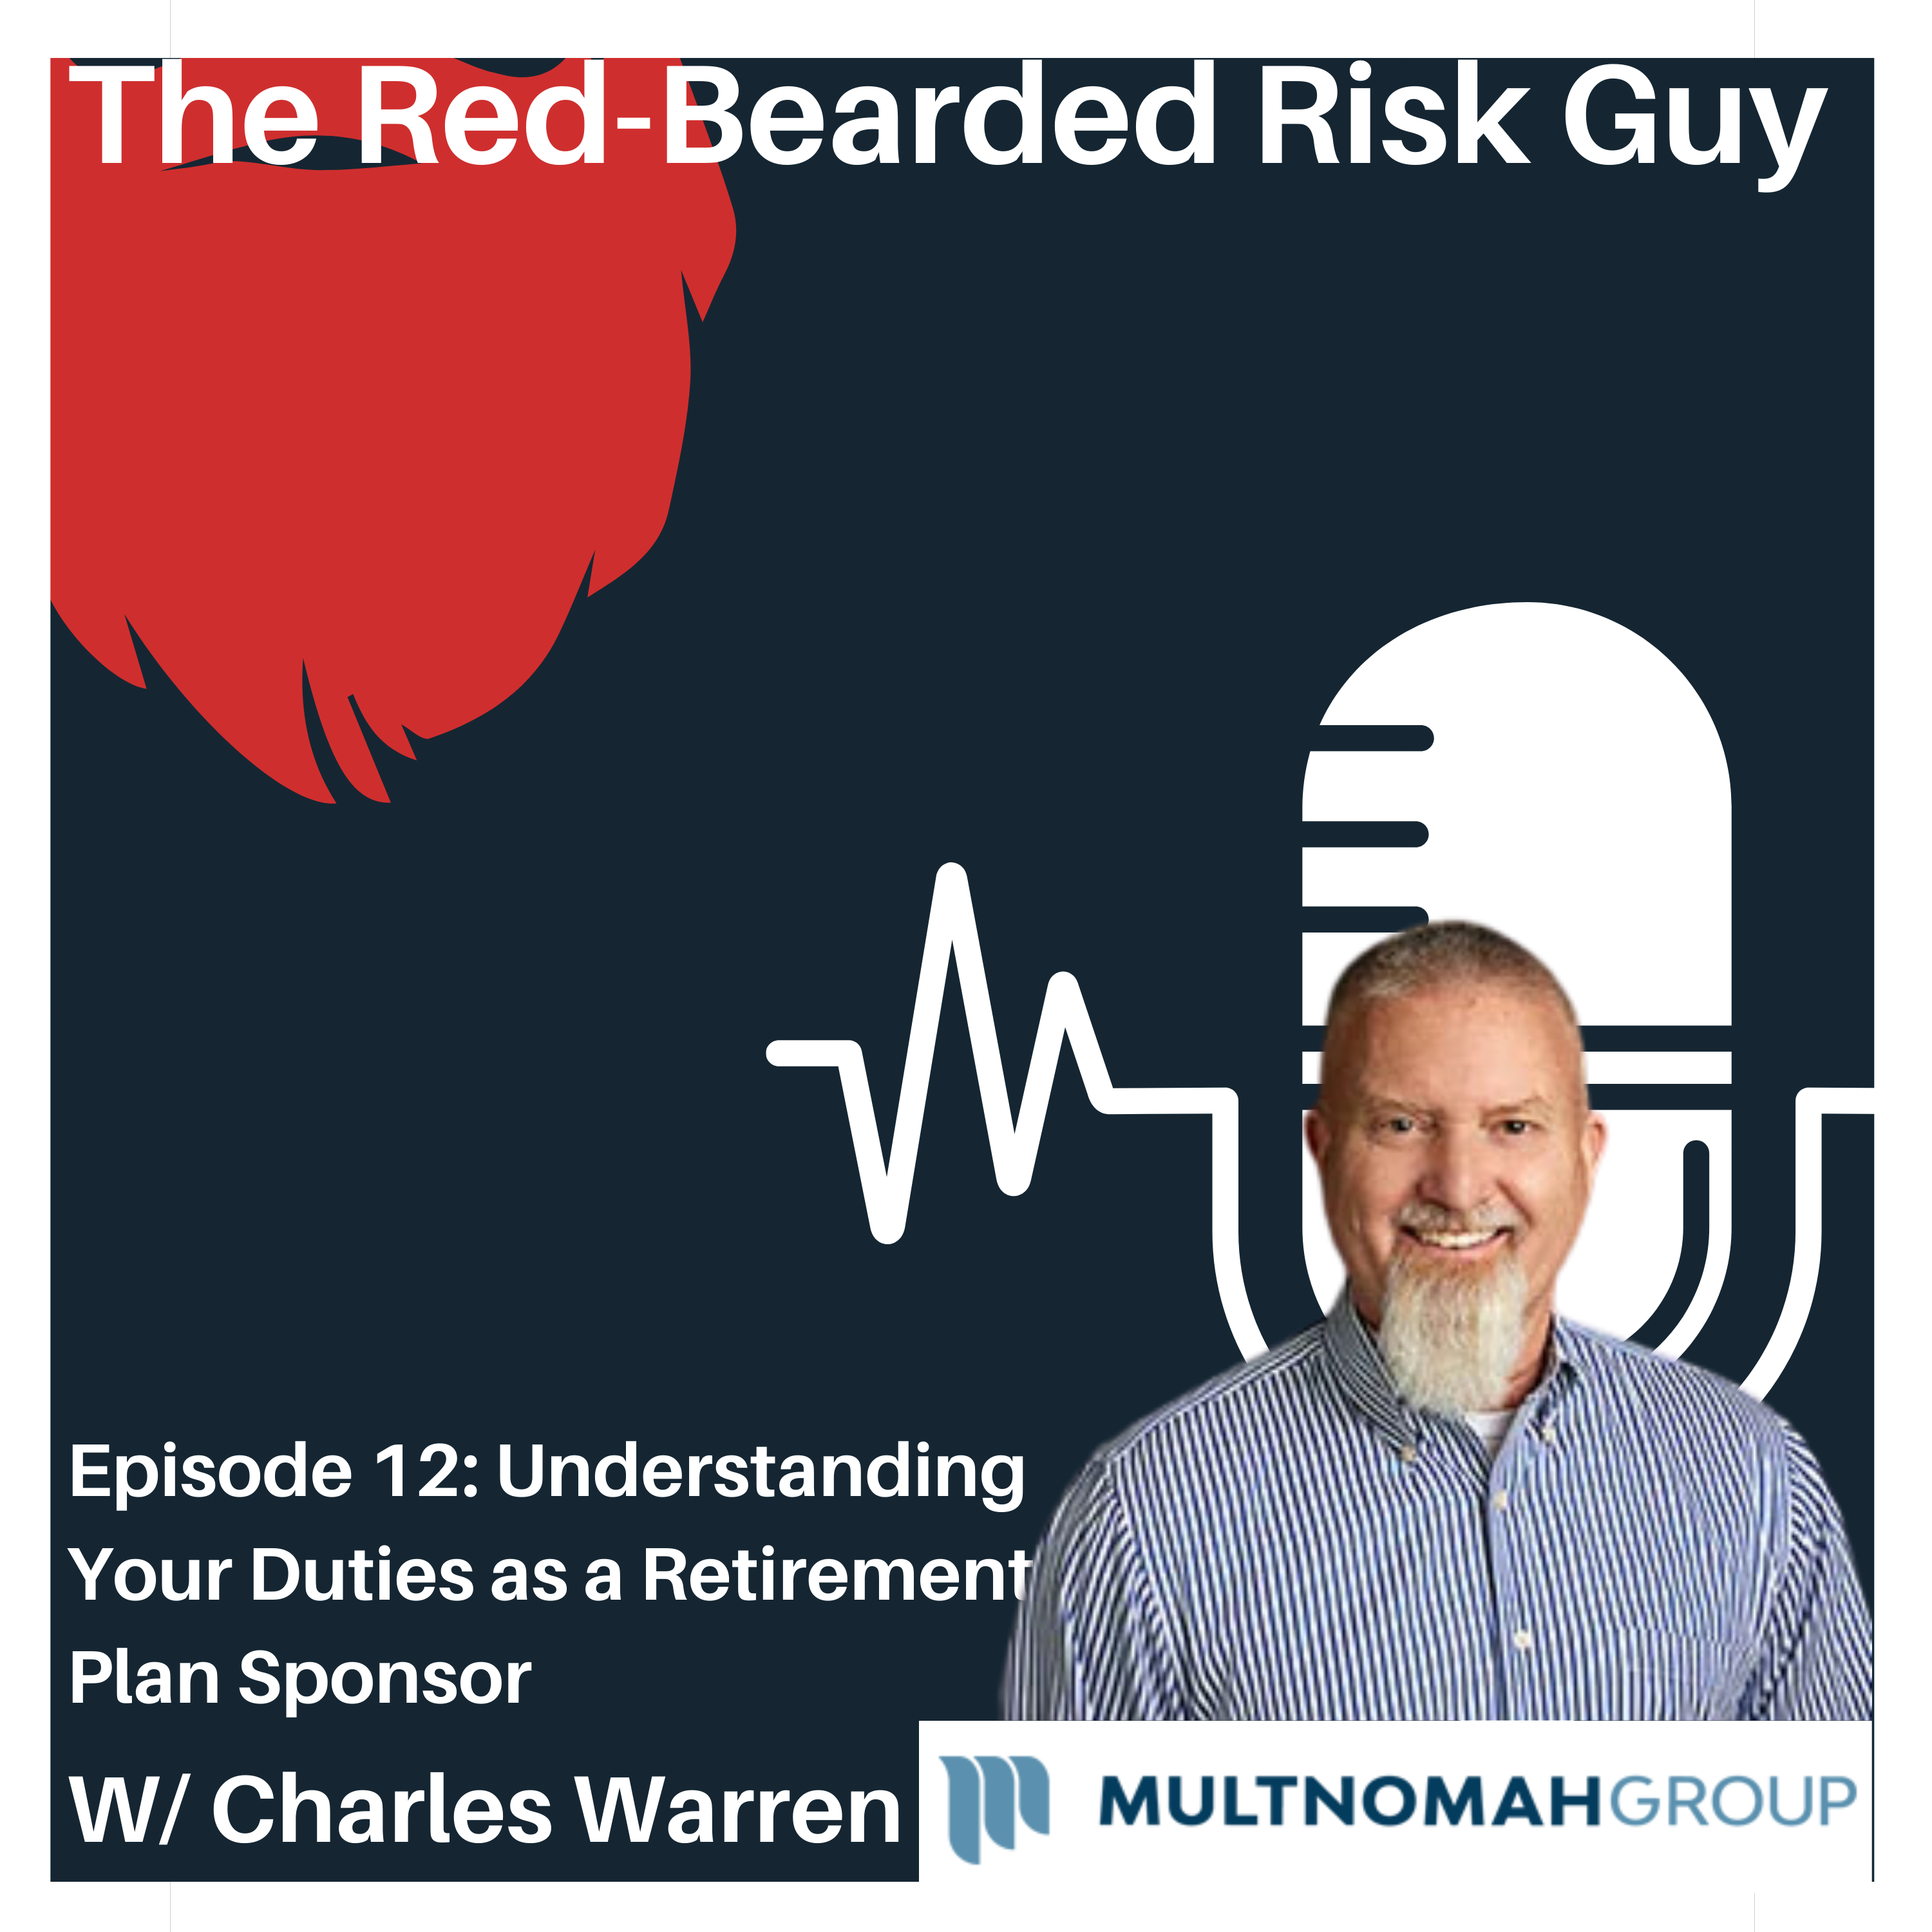 Image of episode are of The Red Bearded Risk Guy podcast showing image of Charles Warrent
Title: understanding your Duties as a Retirement Plan Sponsor